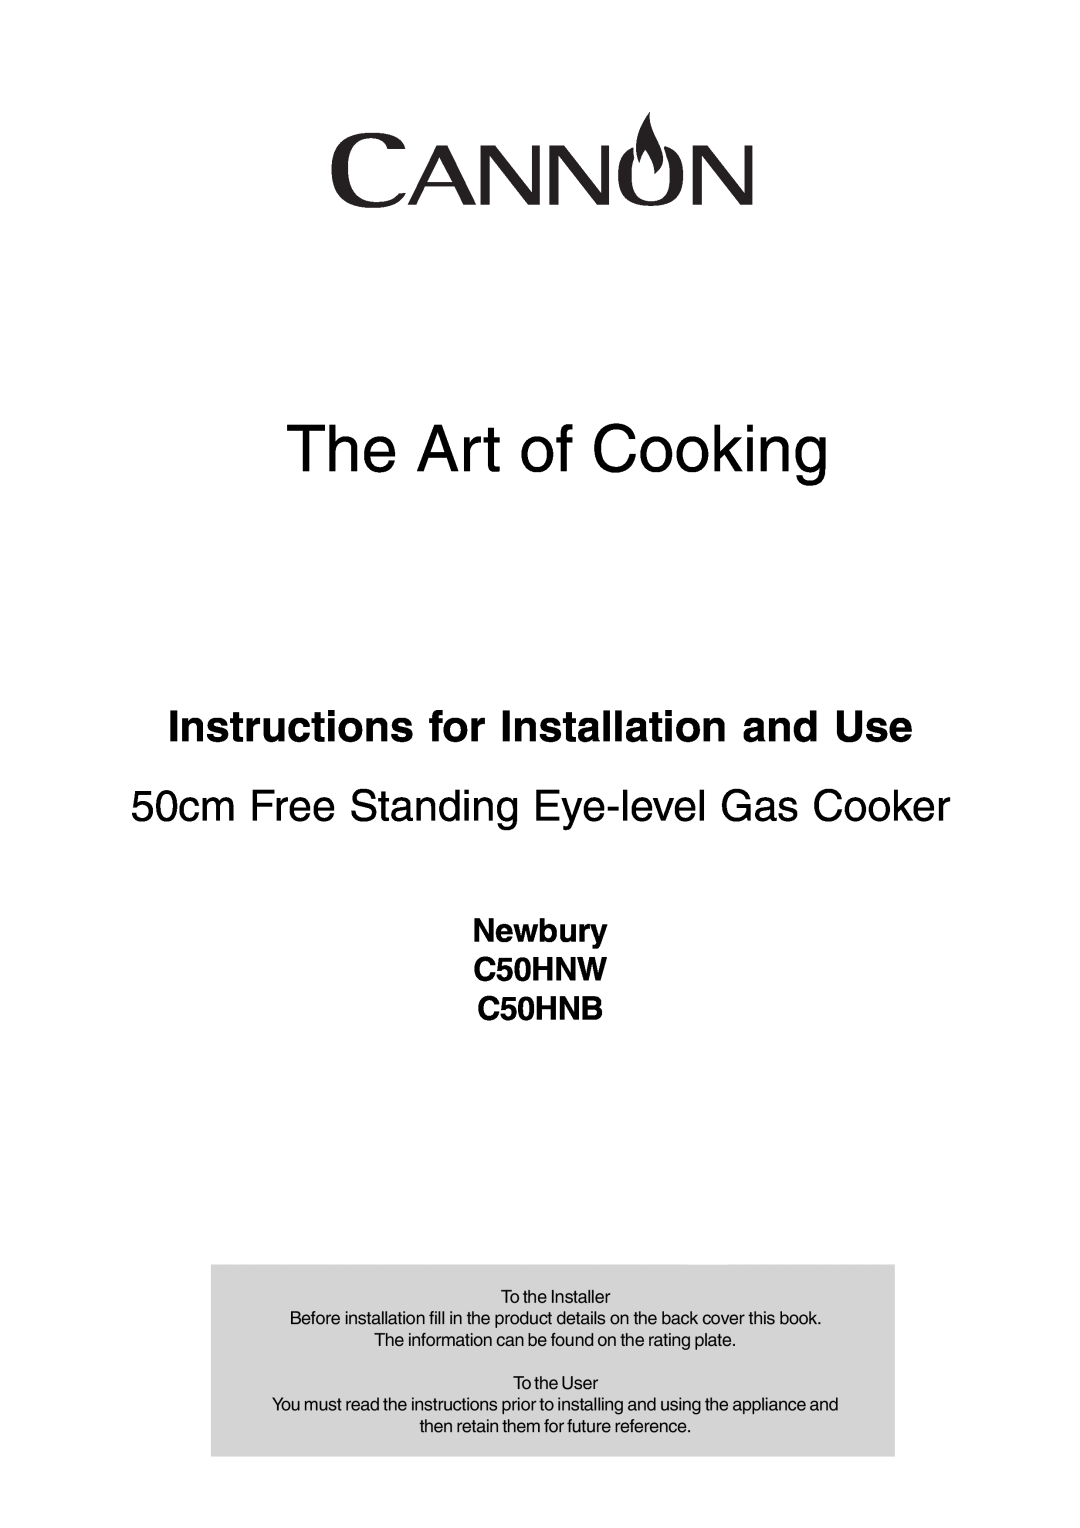 Cannon manual Newbury C50HNW C50HNB, The Art of Cooking, Instructions for Installation and Use 